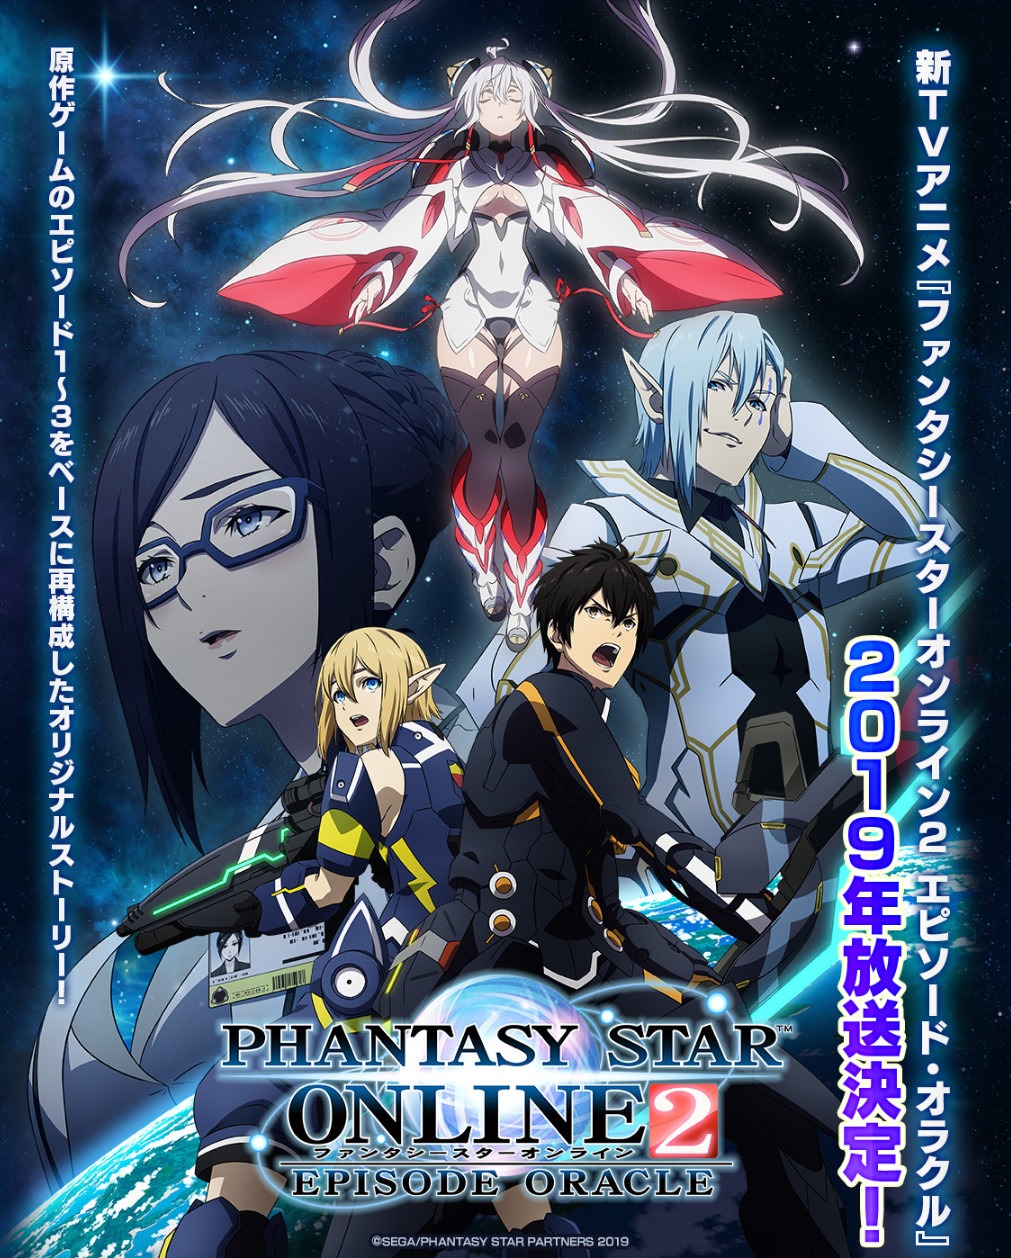 Phantasy Star Online 2 Episode Oracle Is A New Anime Coming In 19 Here S Its First Look Siliconera